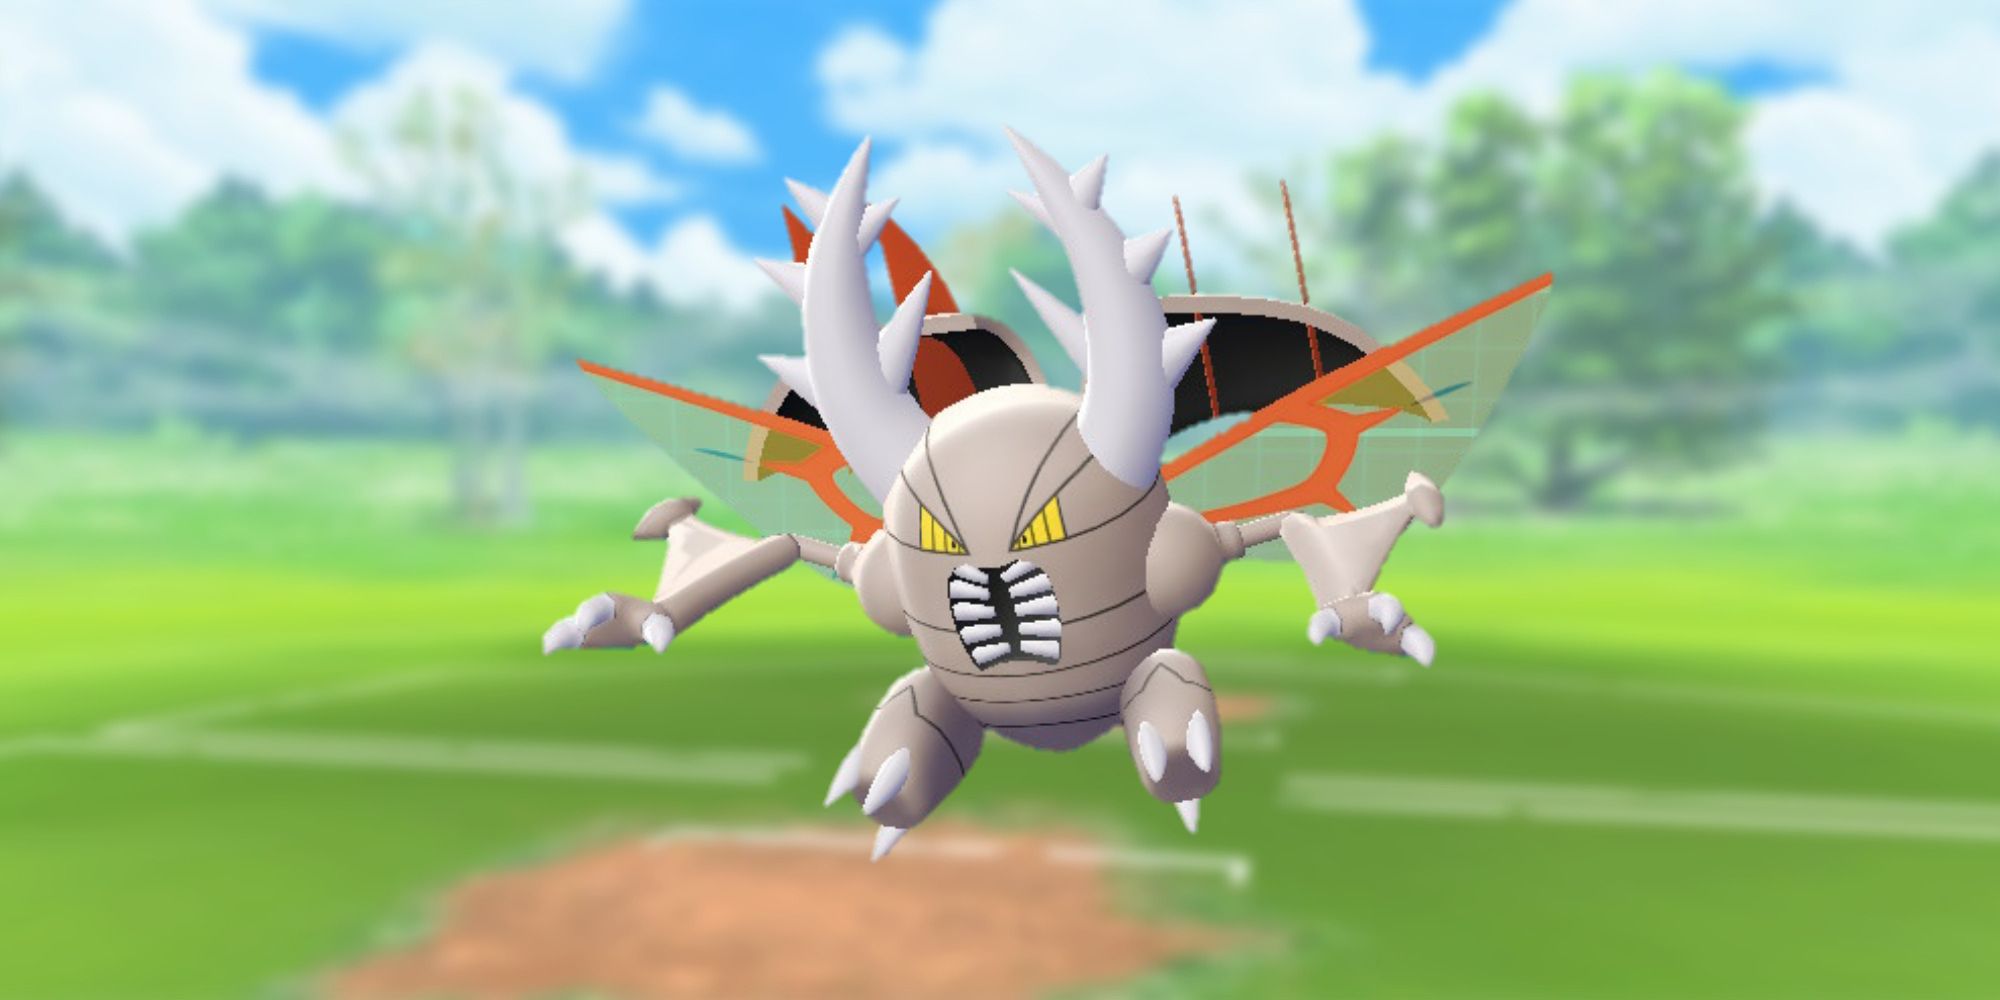 Mega Pinsir from Pokemon with the Pokemon Go battlefield as the background